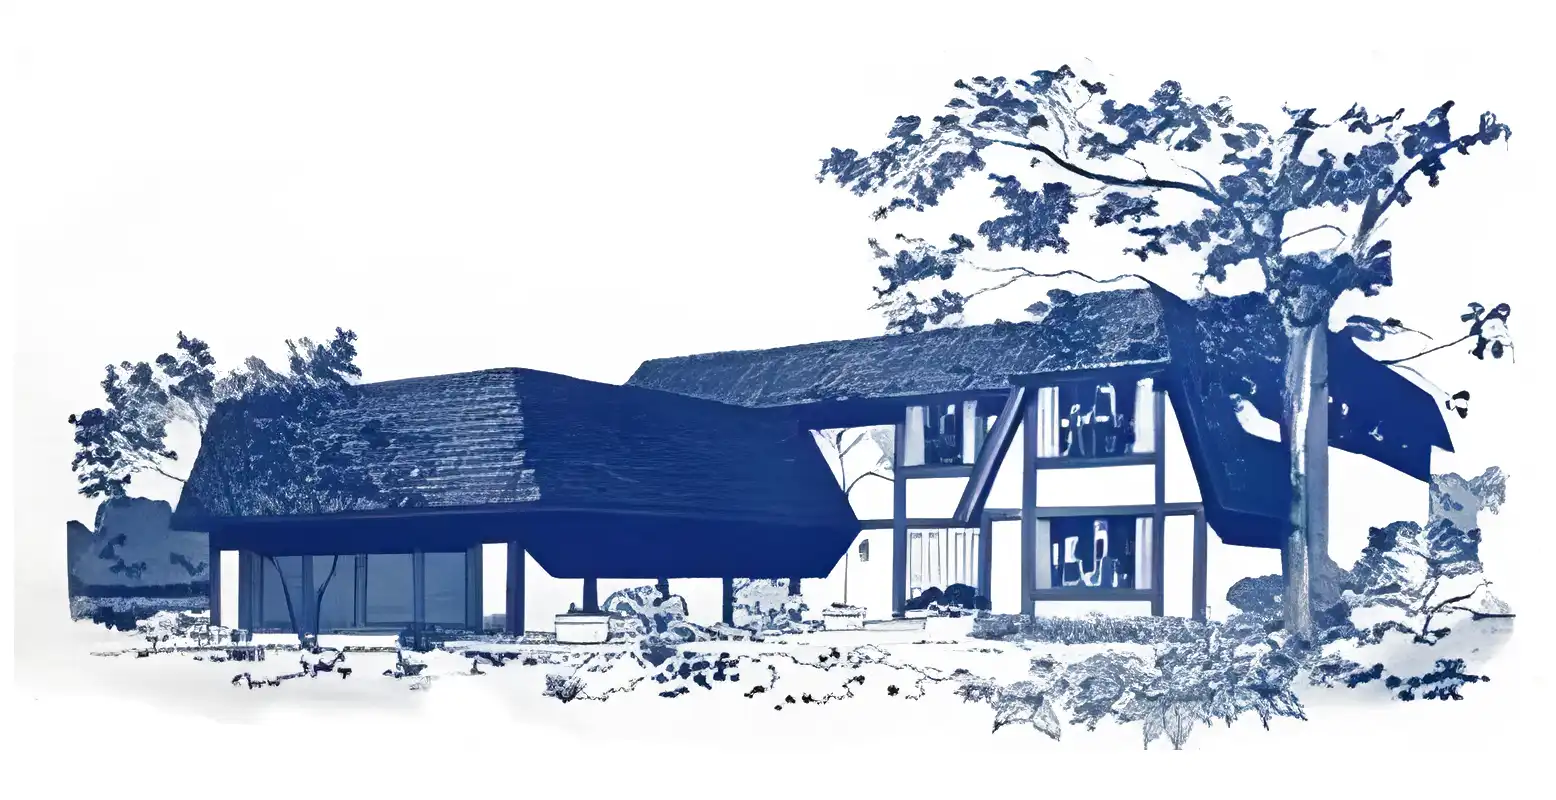 Monochrome rendering of 1960s 2 story house, variant with mansard roofs and rustic half-timber details.